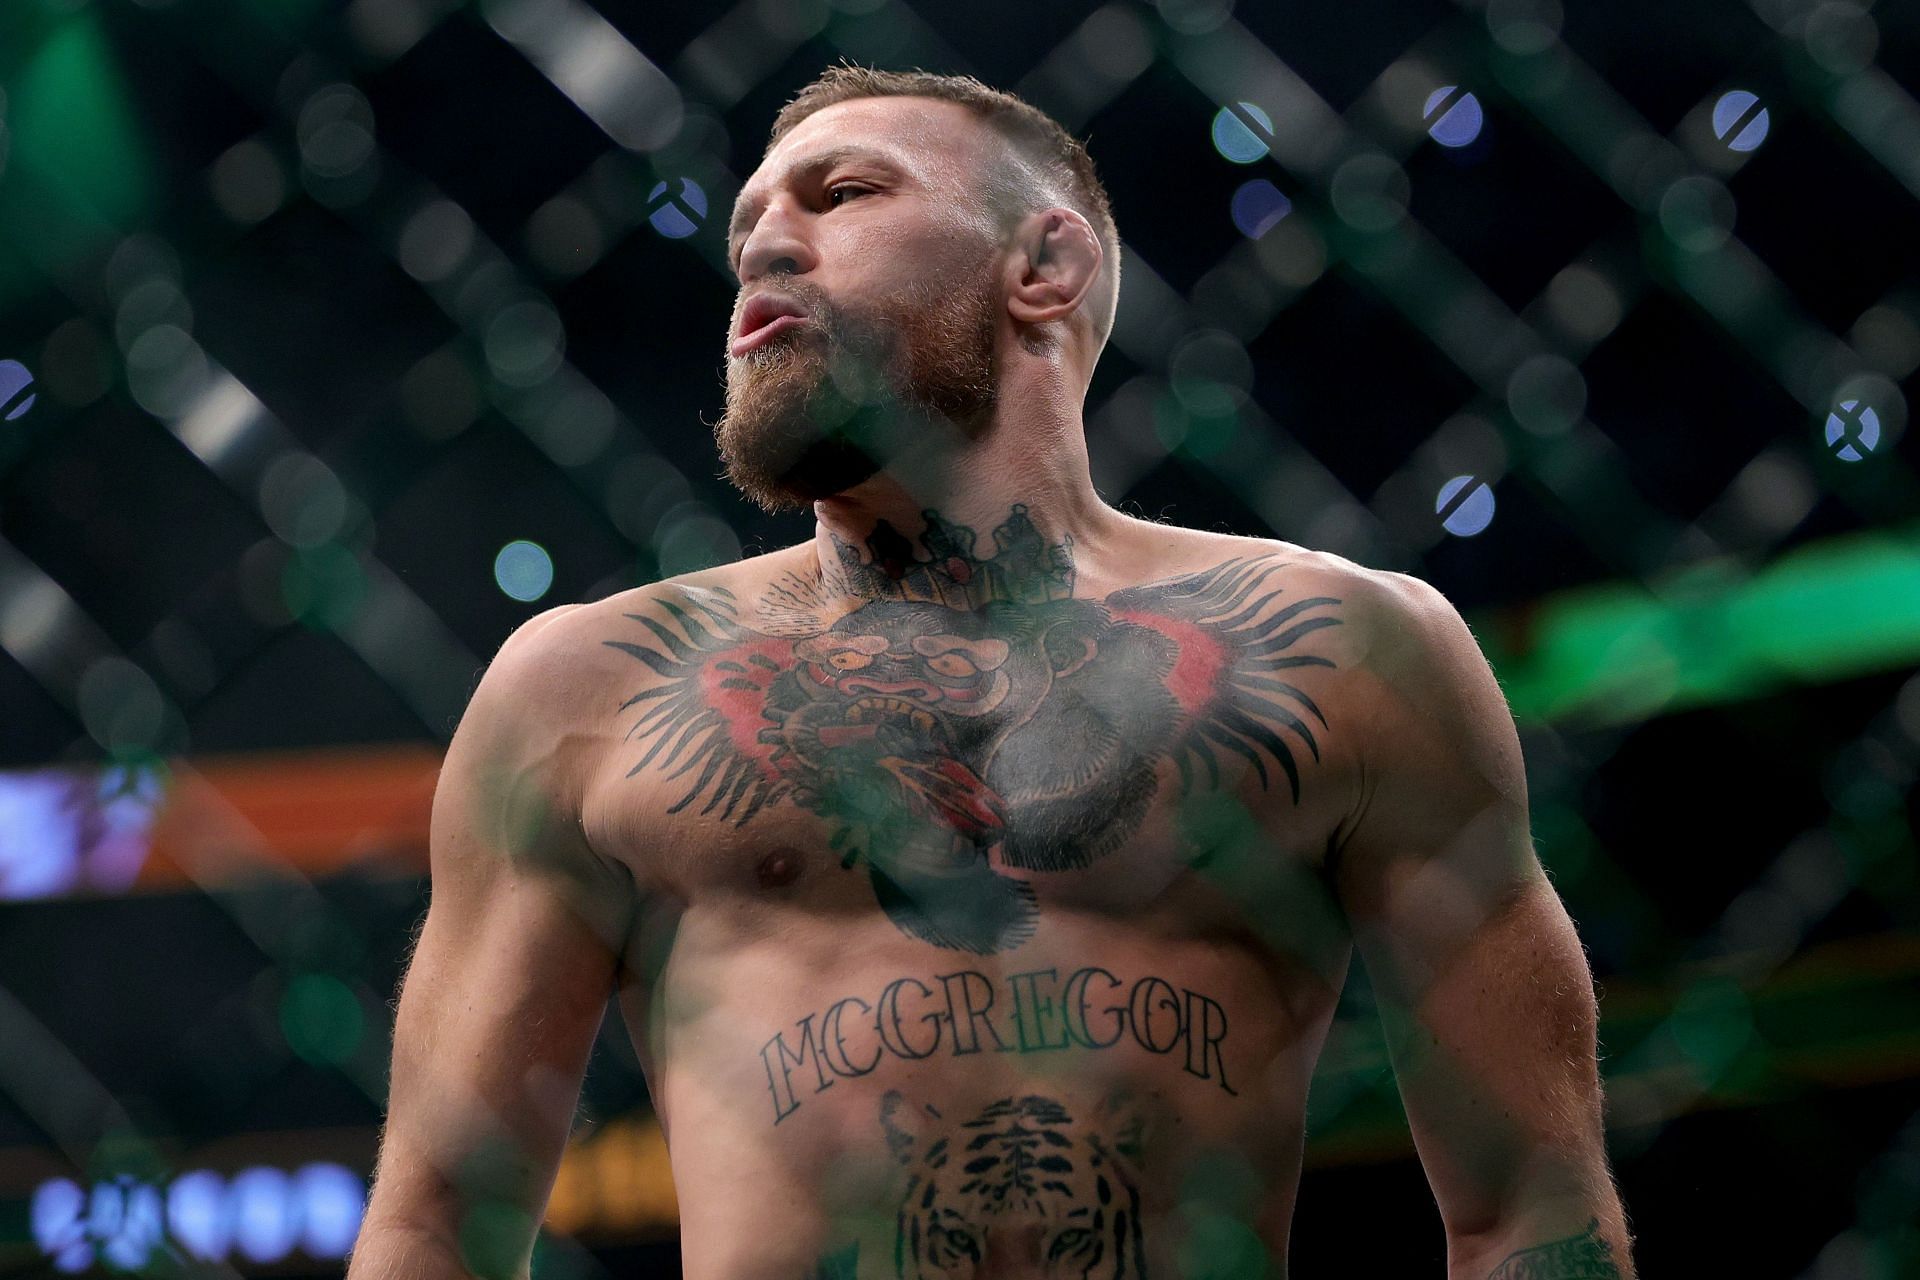 McGregor has competed at featherweight, lightweight, and welterweight.